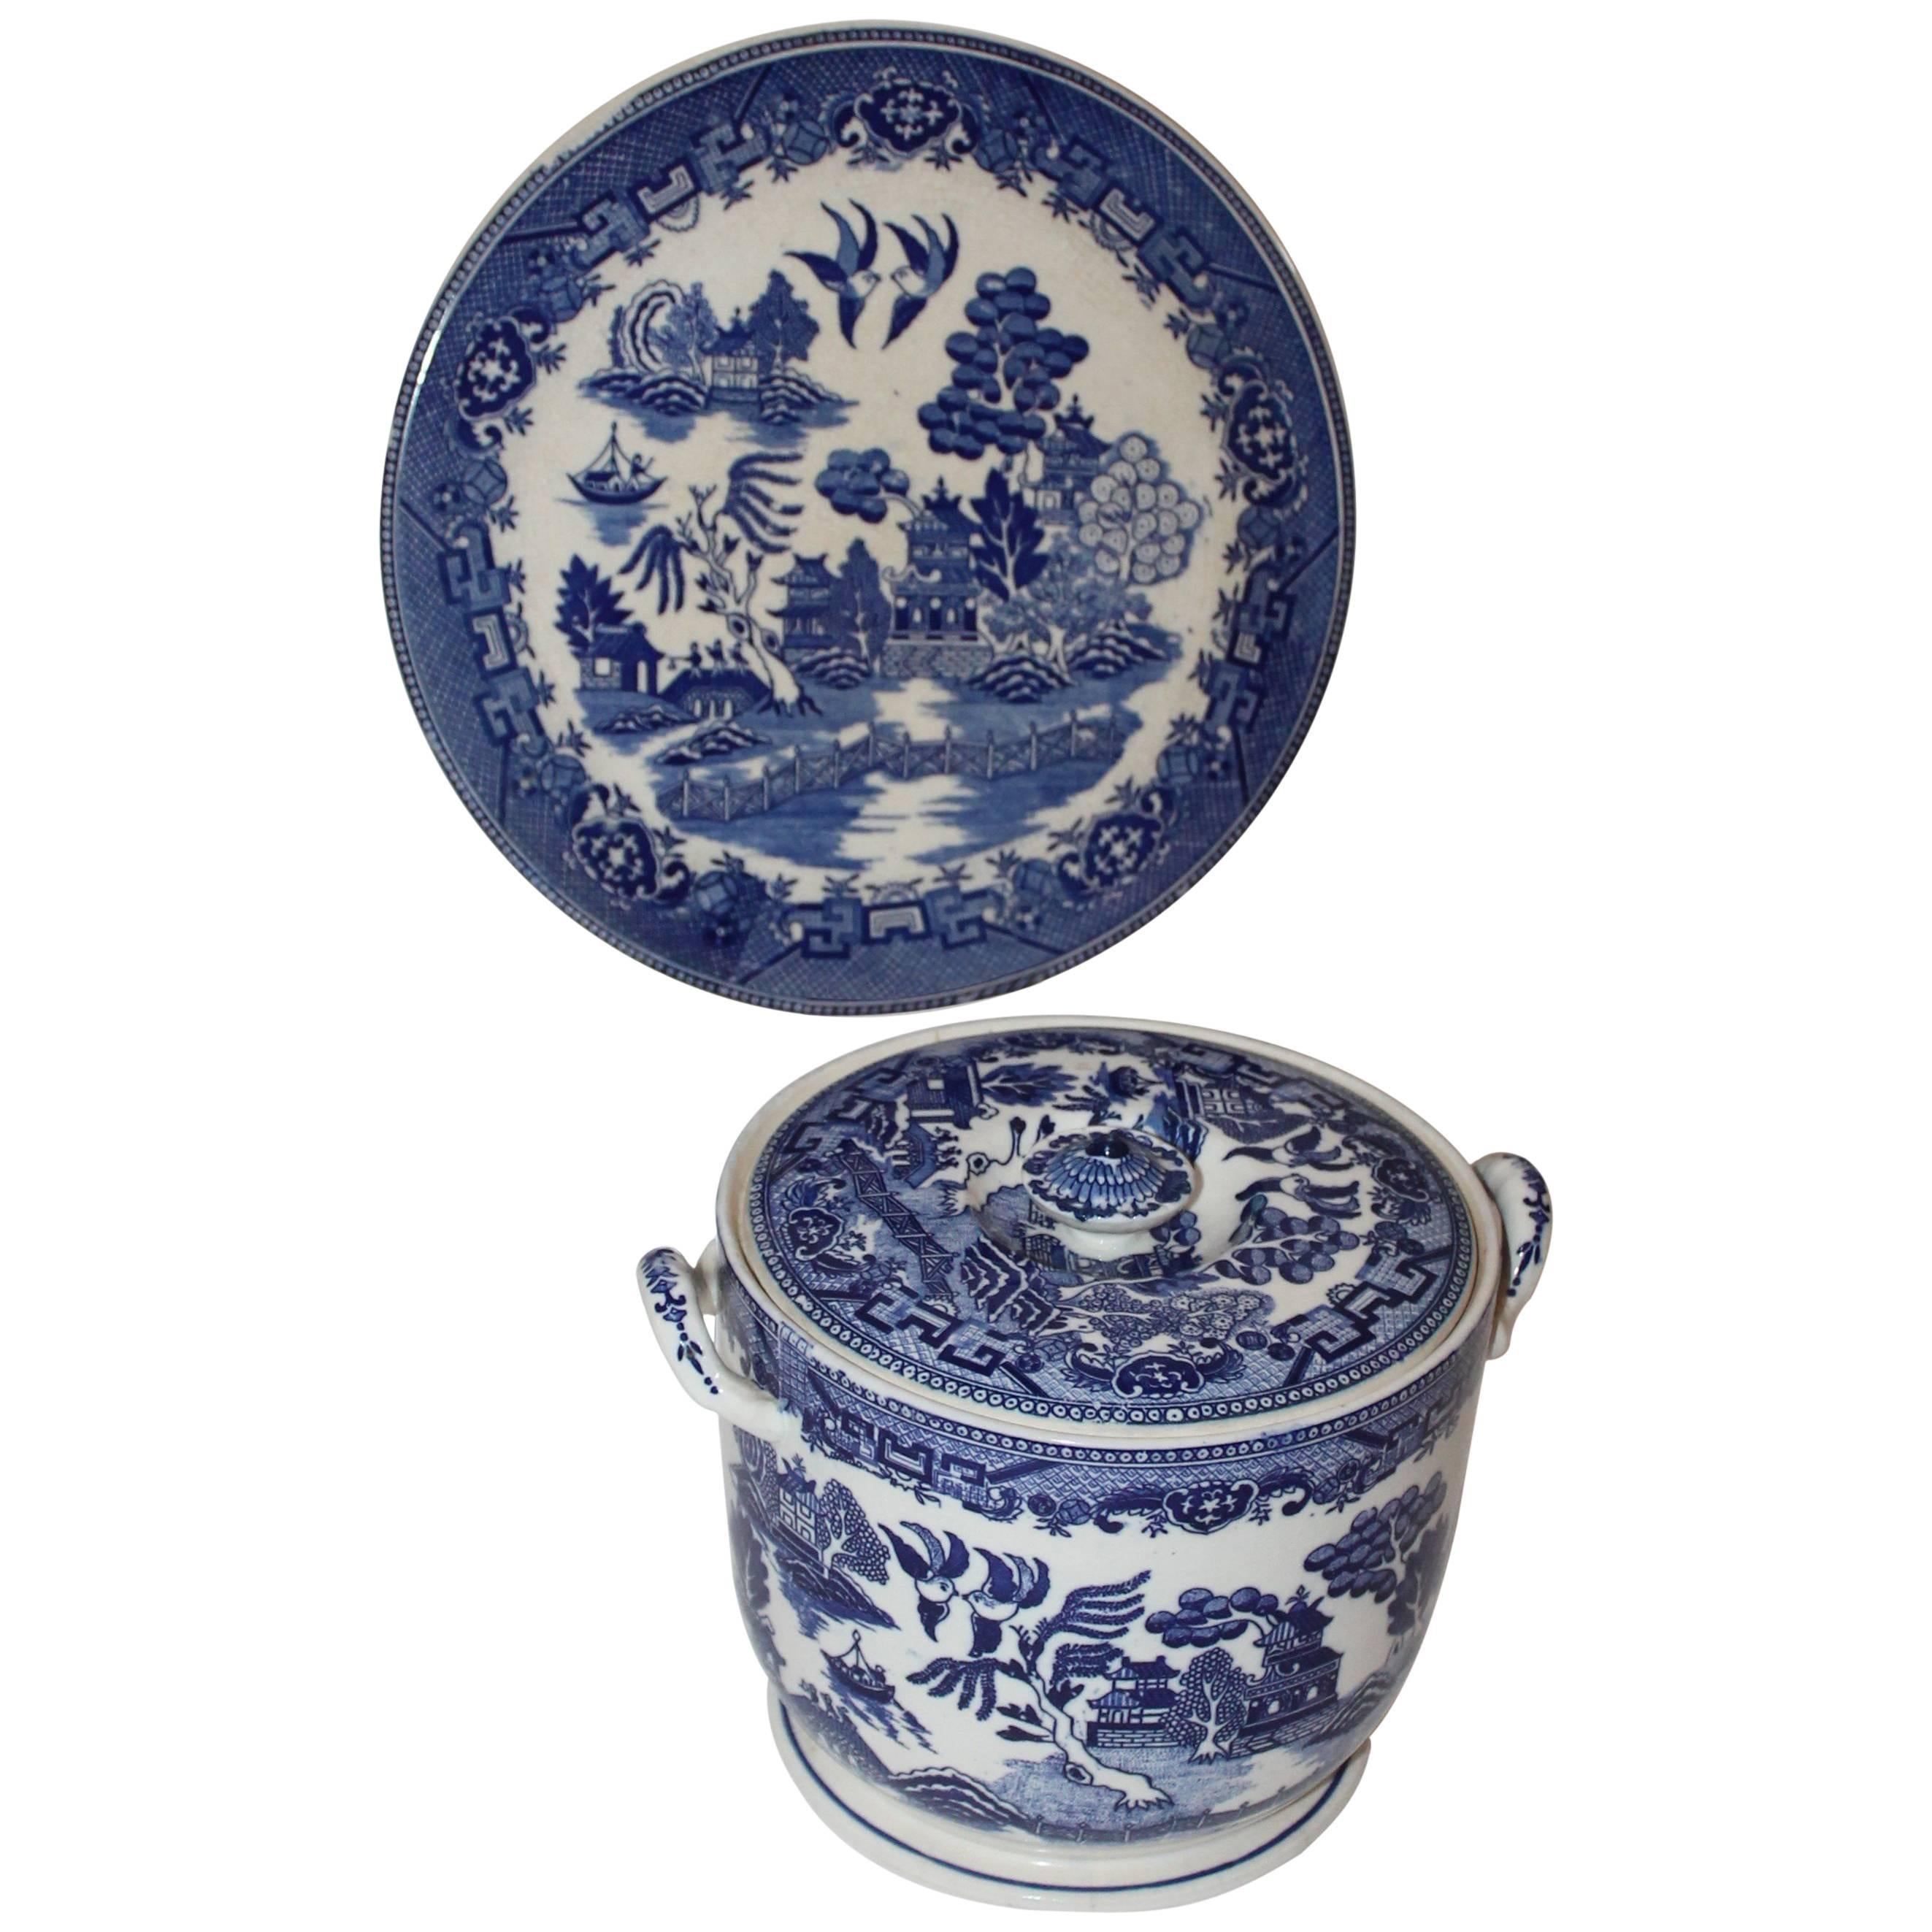 Blue Willow Cracker Jar and Large Cake Plate